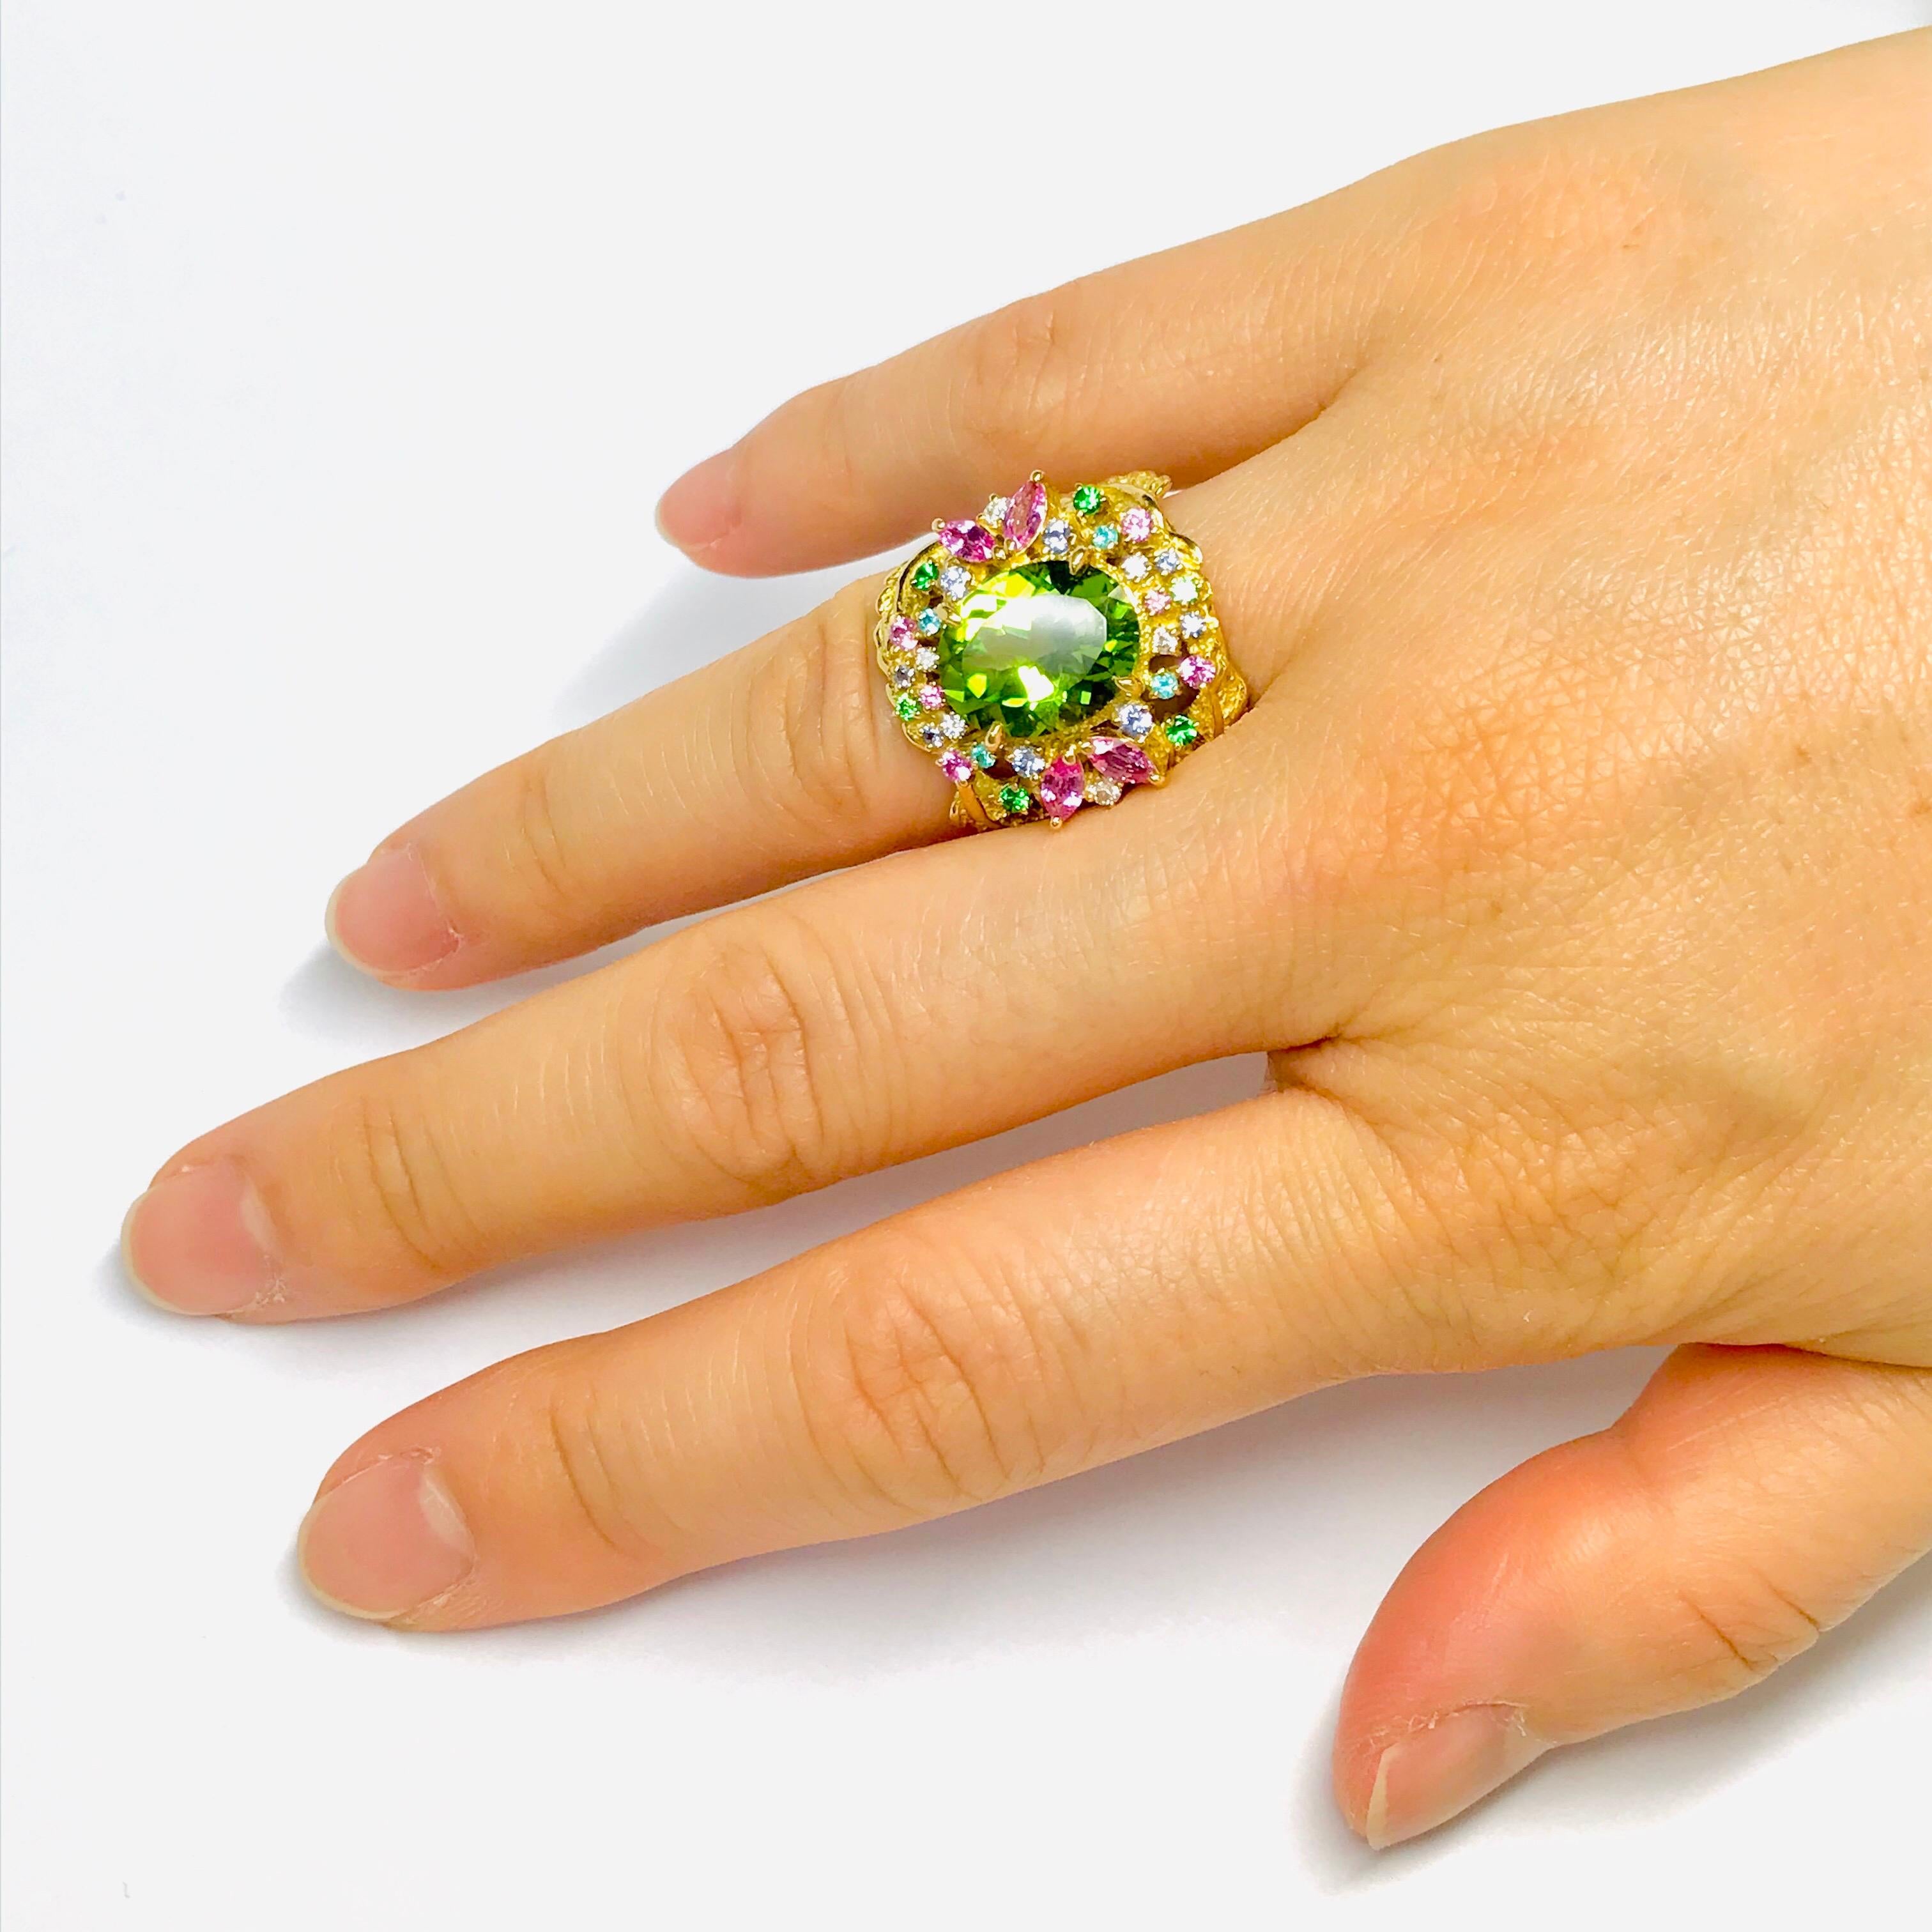 The list price includes the Japanese 10% Sales Tax.
All buyers outside of Japan will receive the tax exemption from the list price. 
Please inquire for details.

[Product Details]
K18YG
OVAL PERIDOT  5.34ct
PINK SAPPHIRE 1.06ct
GREEN GARNET